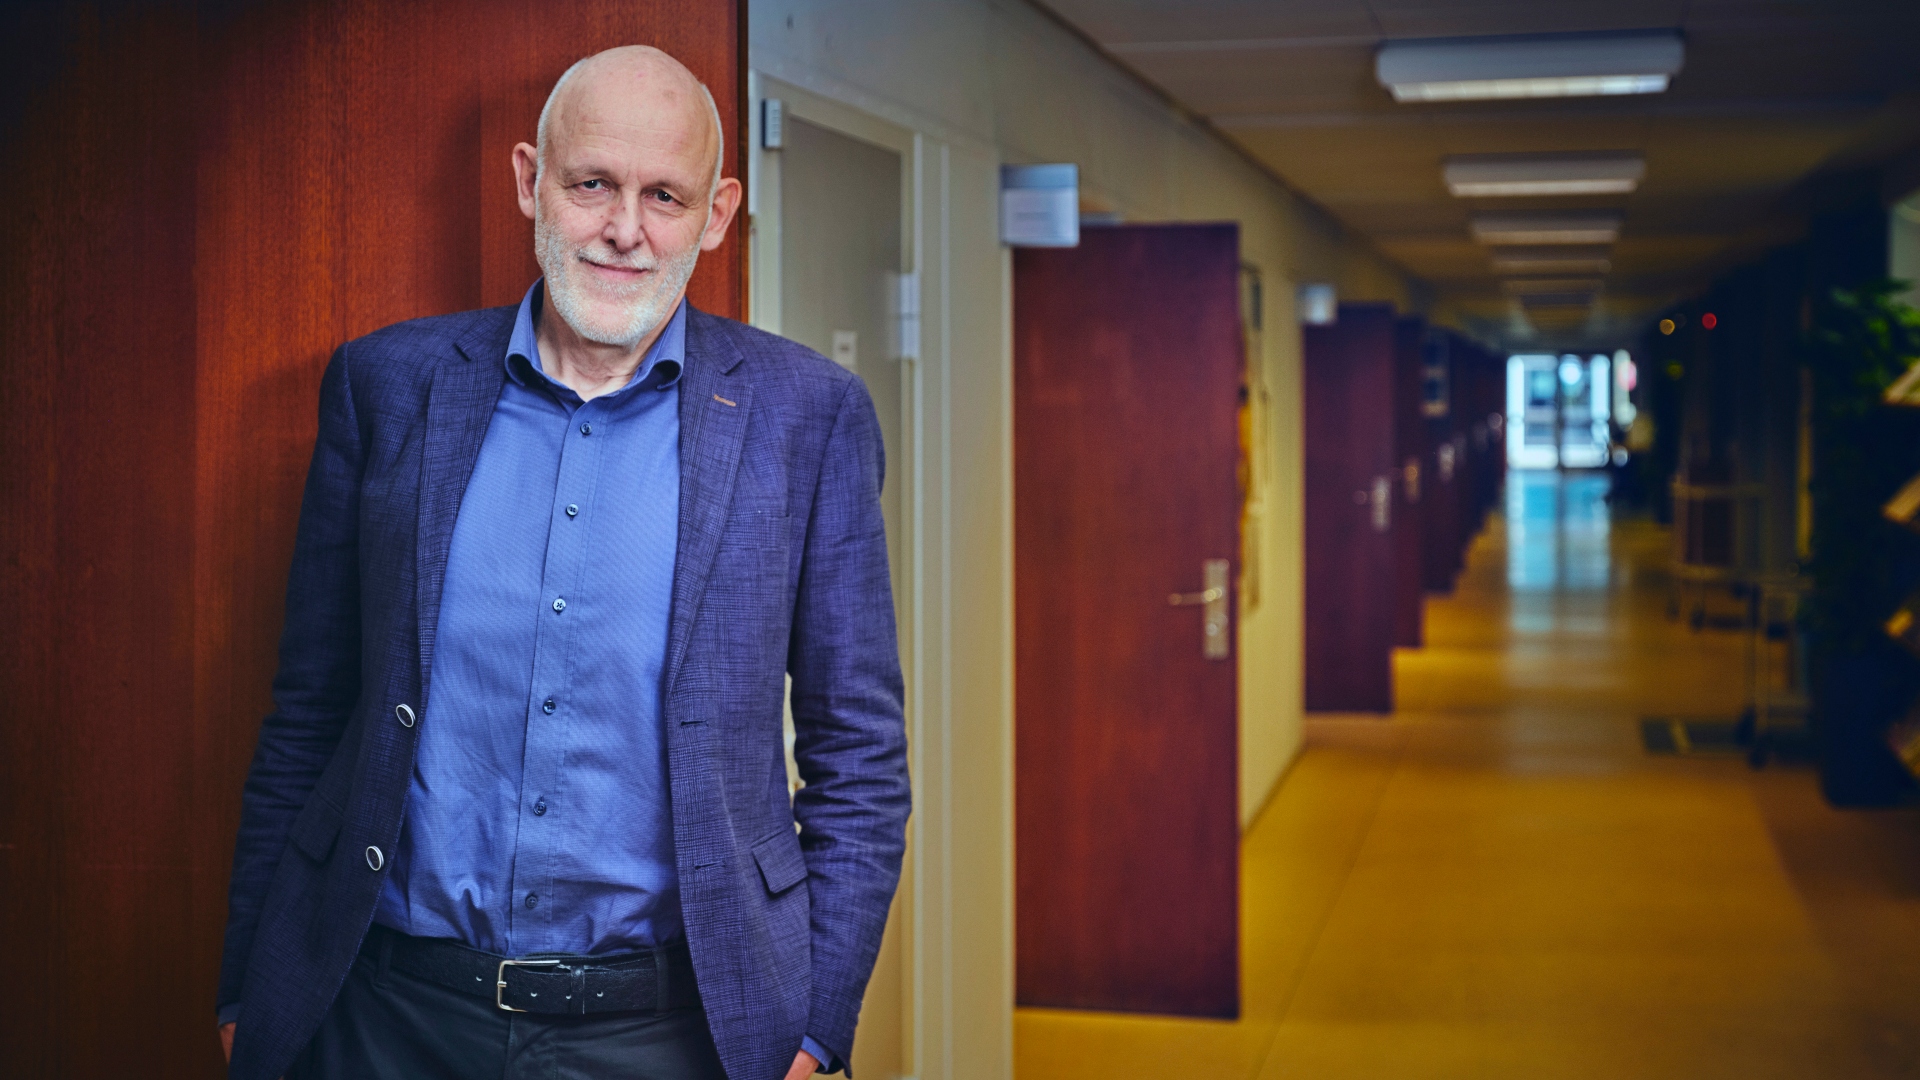 Photo of Bent Lauritzen, Head of Section at DTU Physics, taken at Risø Campus.